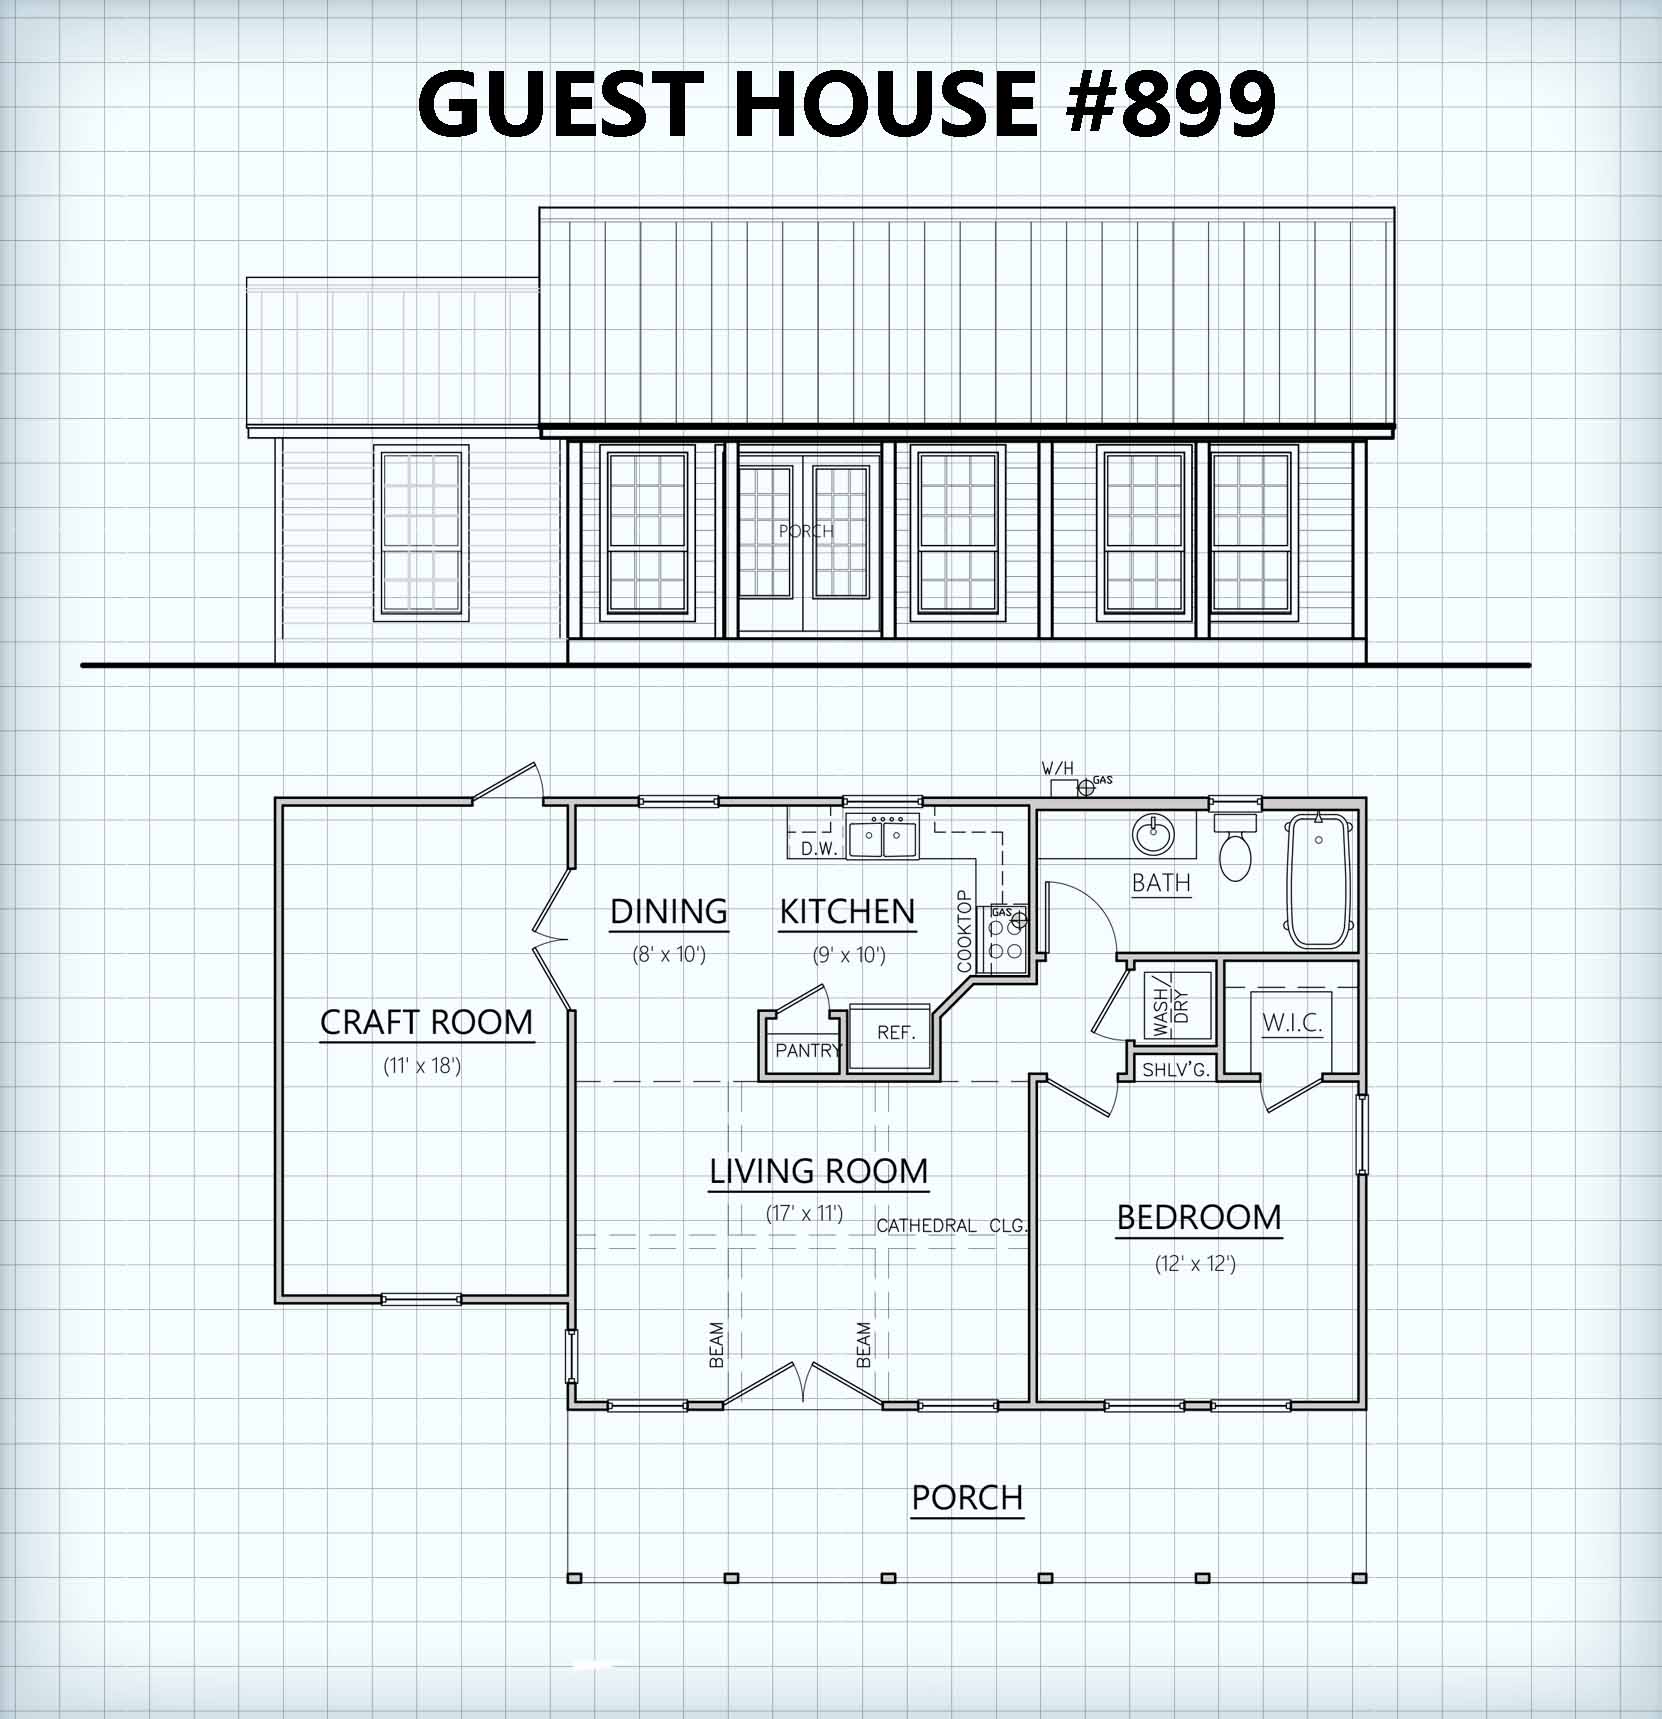 Guest House #899